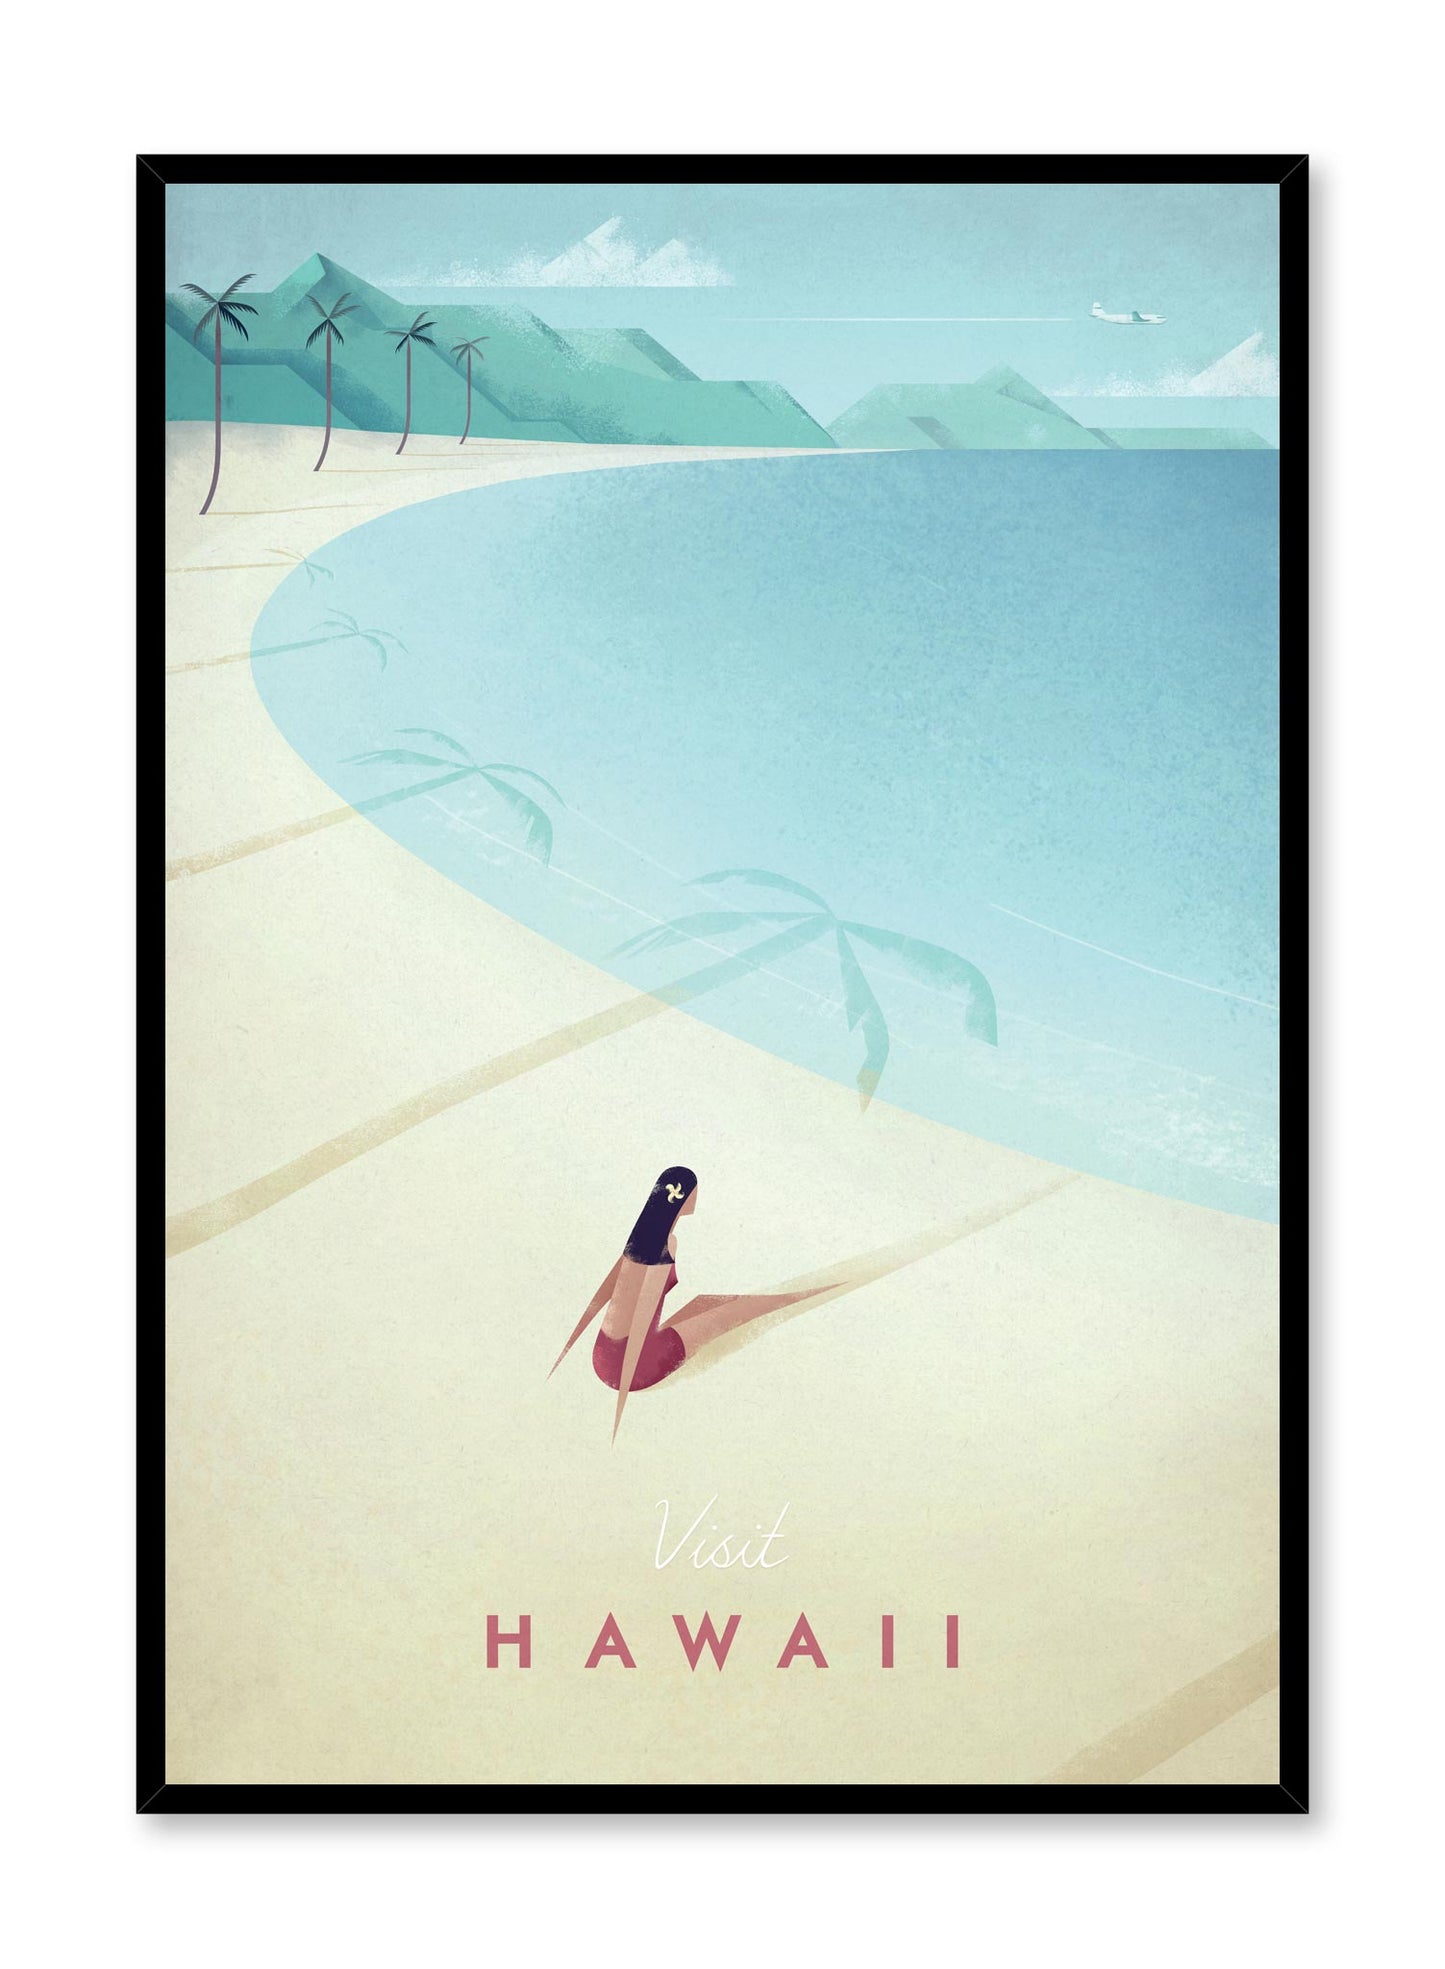 Modern minimalist travel poster by Opposite Wall with illustration of Hawaii